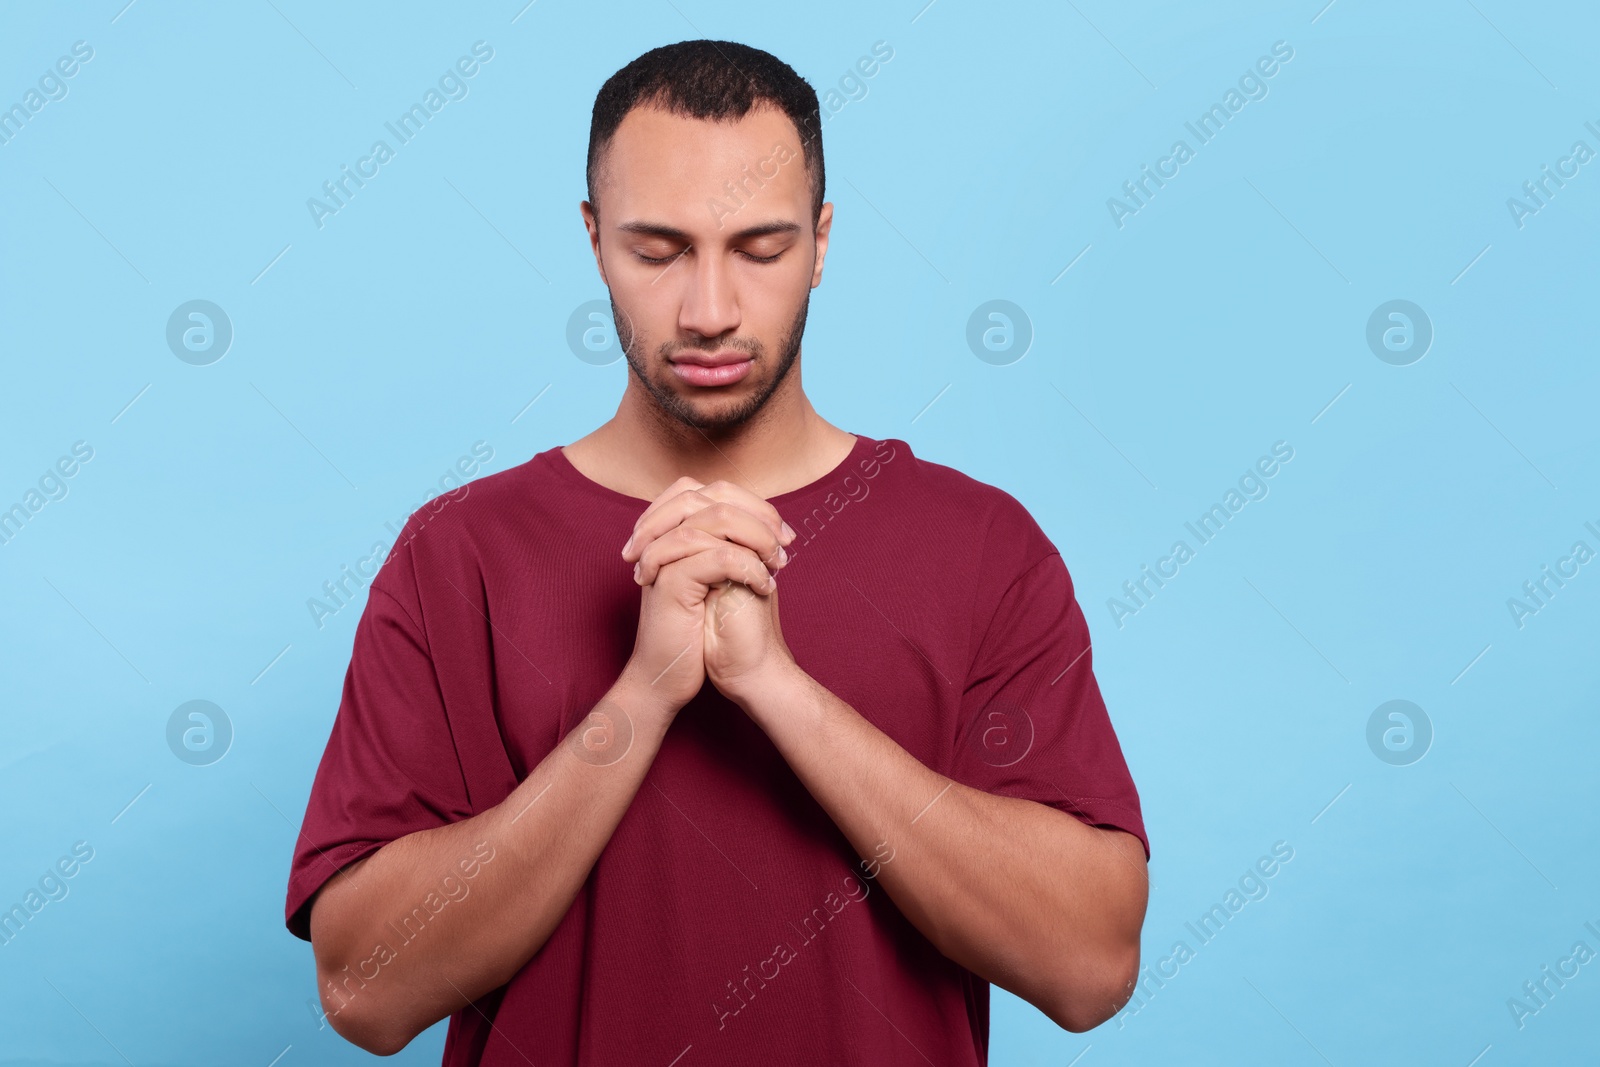 Photo of African American man with clasped hands praying to God on light blue background